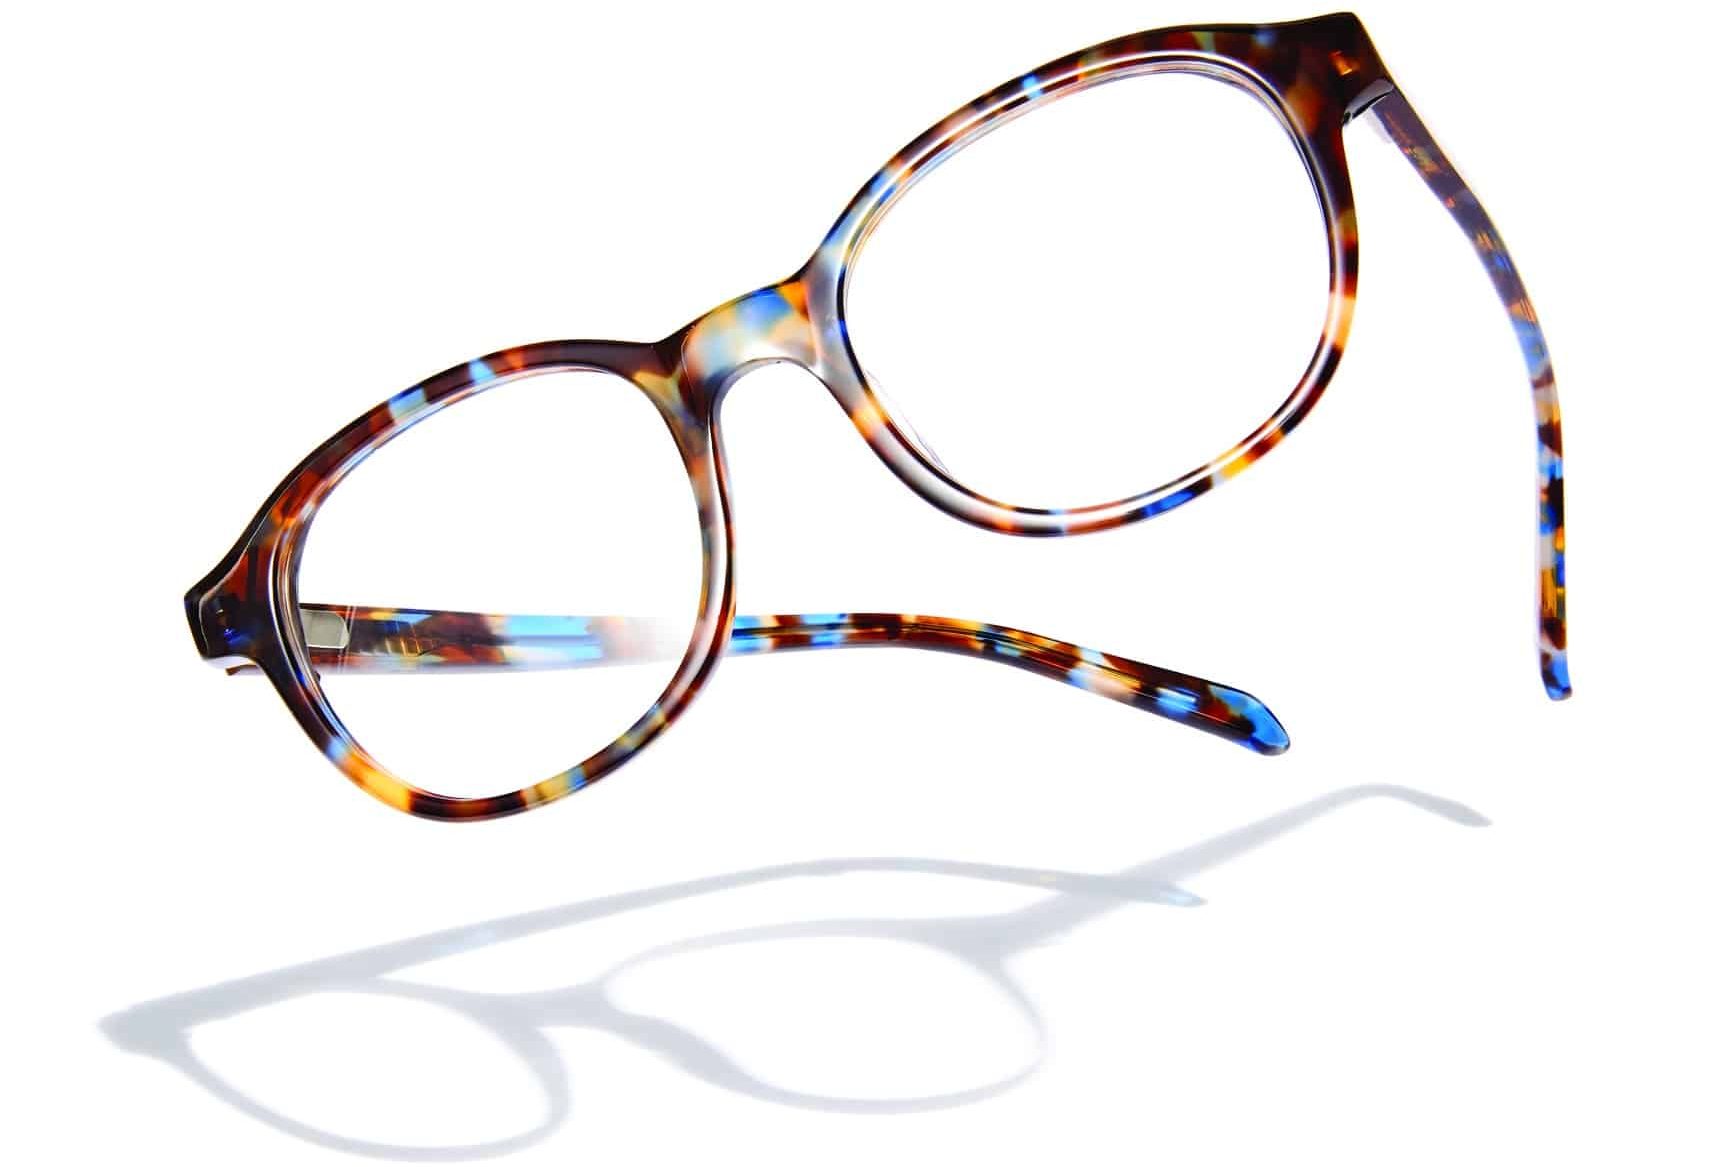 5 Reasons Why Bioacetate S70® is the Better, Greener Alternative for Eyewear